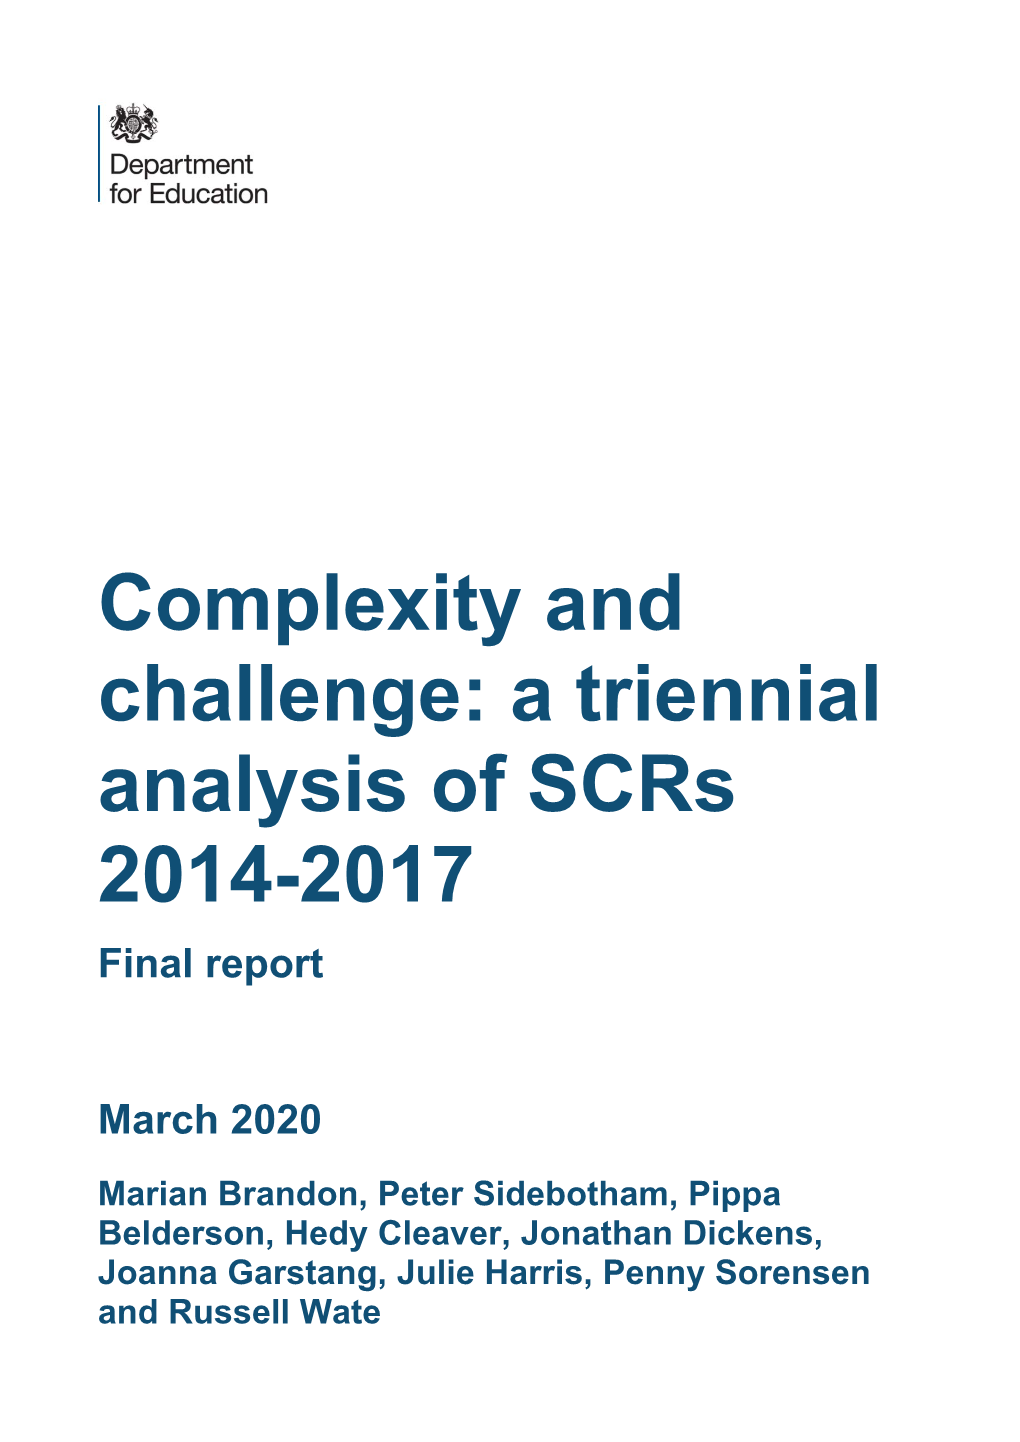 Complexity and Challenge: a Triennial Analysis of Scrs 2014-2017 Final Report